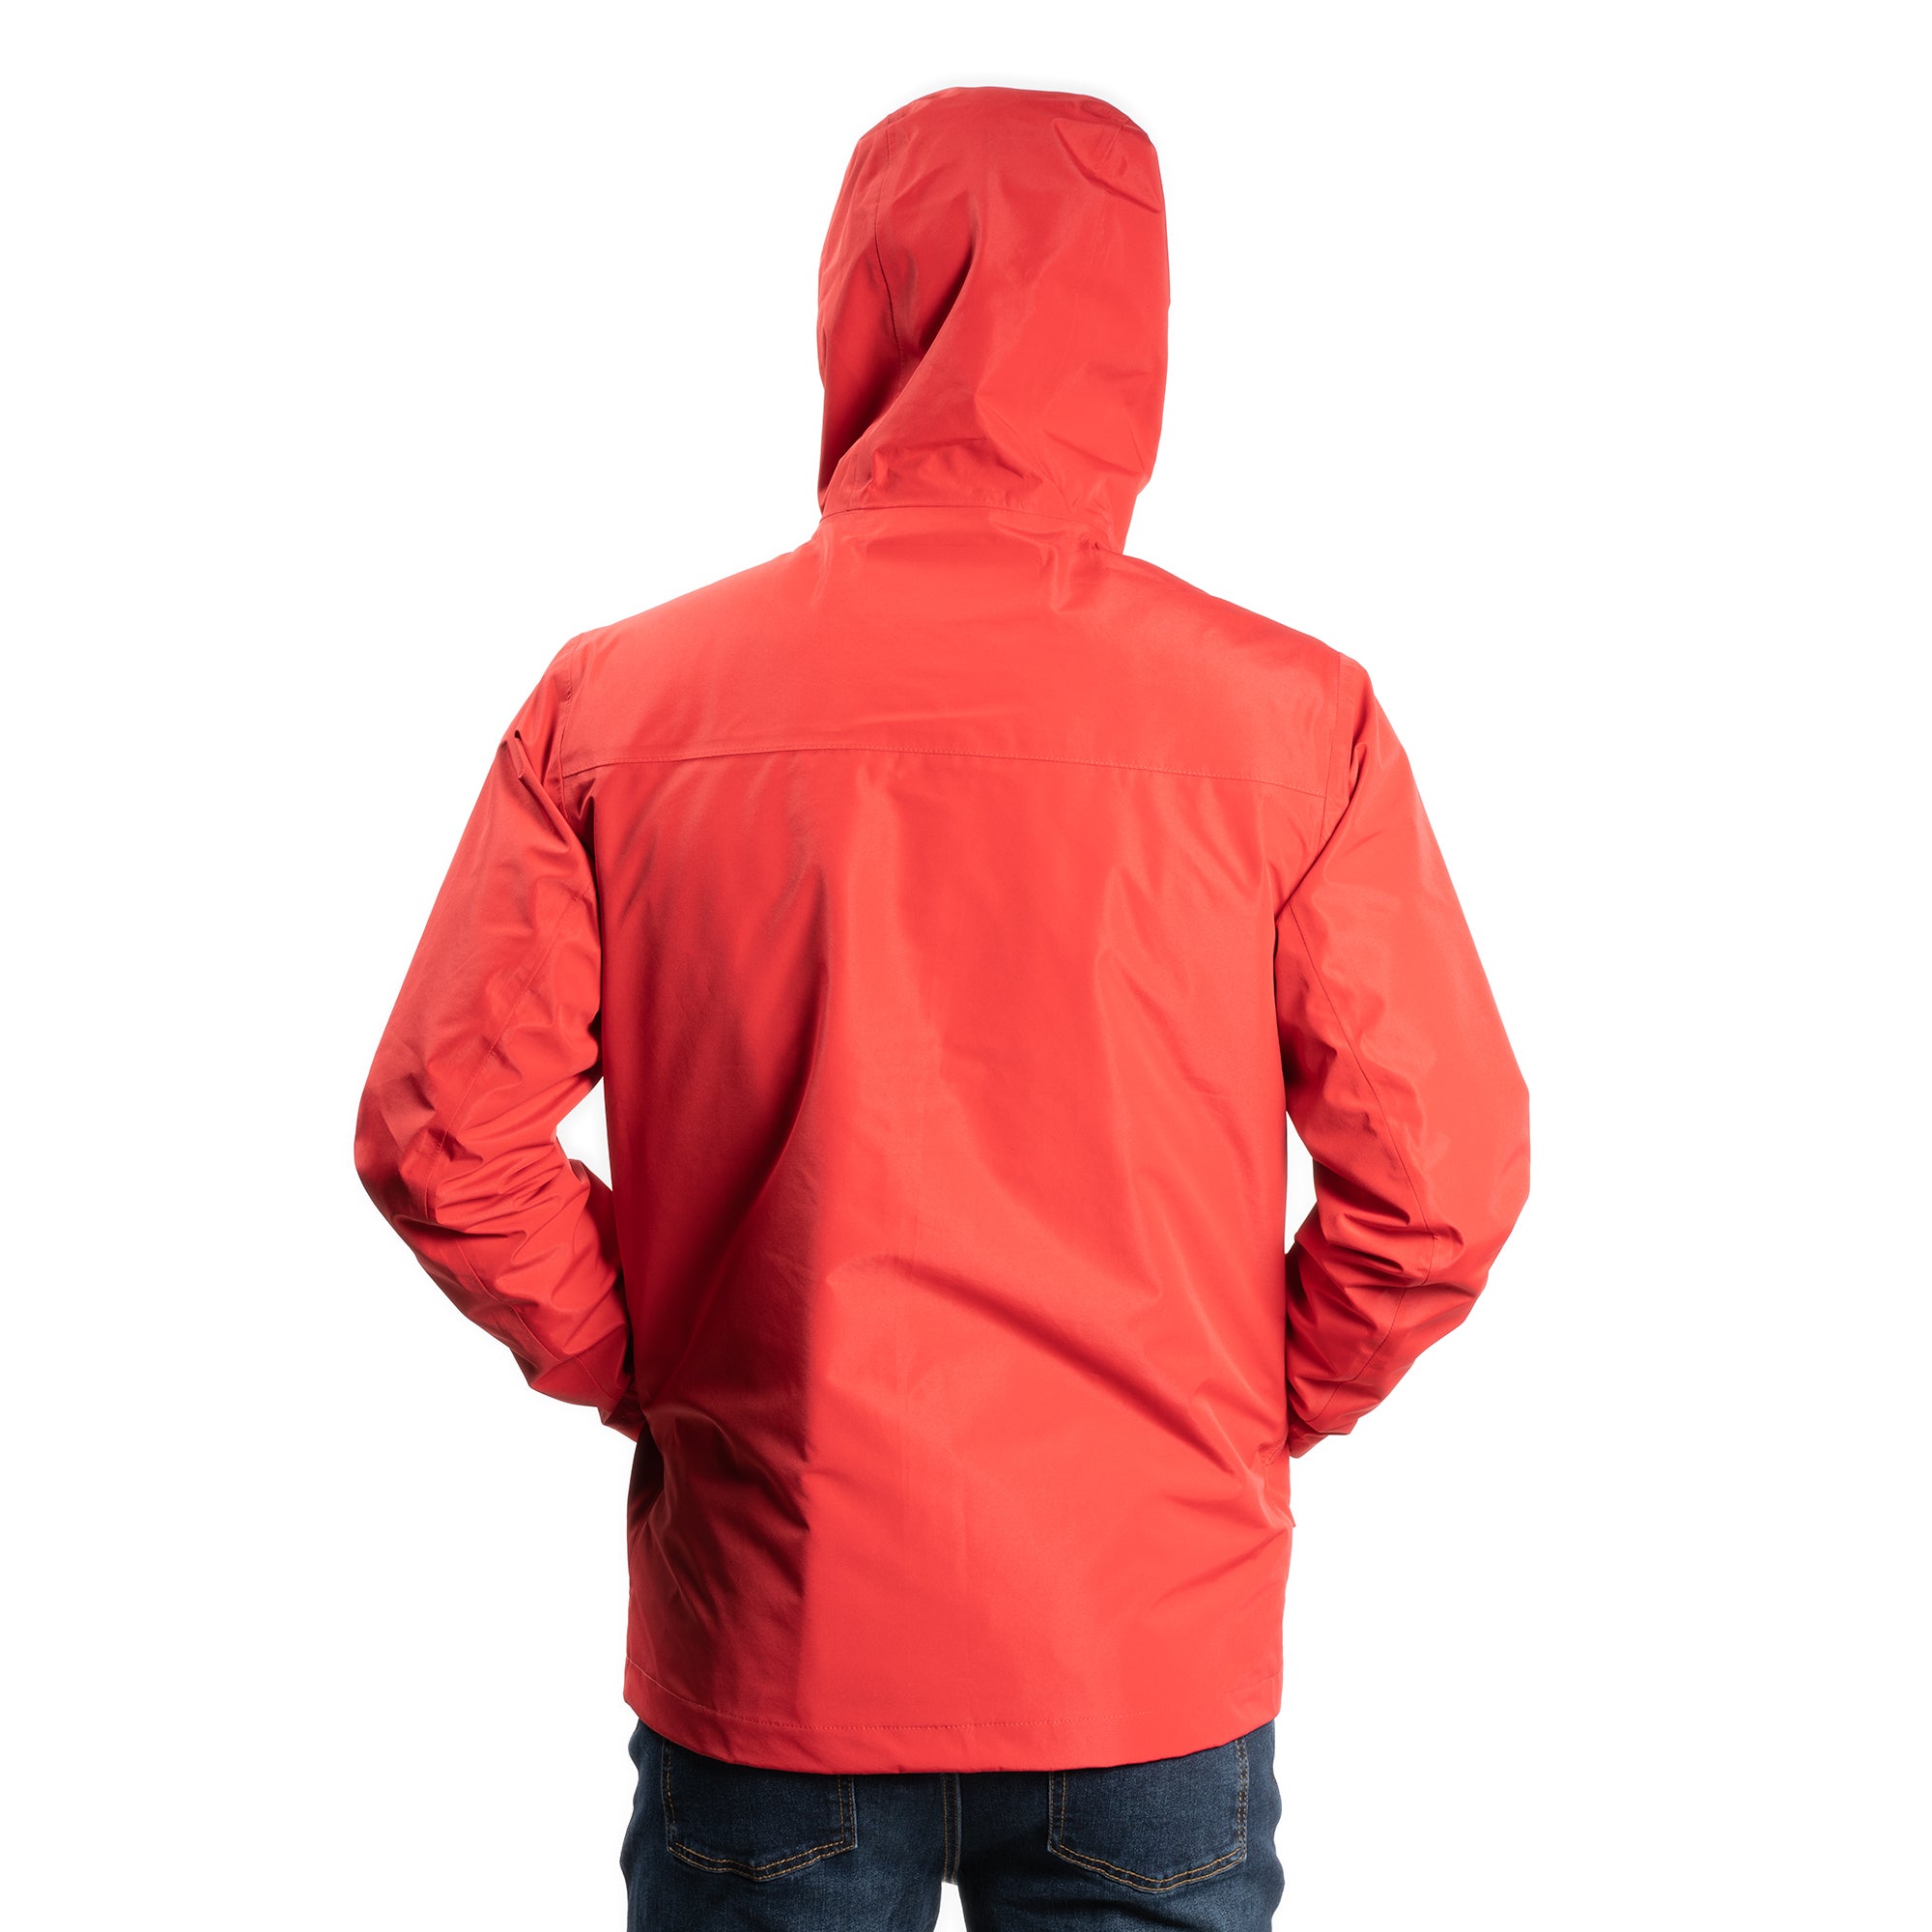 Tech Rain Jacket, Red | Peter Manning NYC